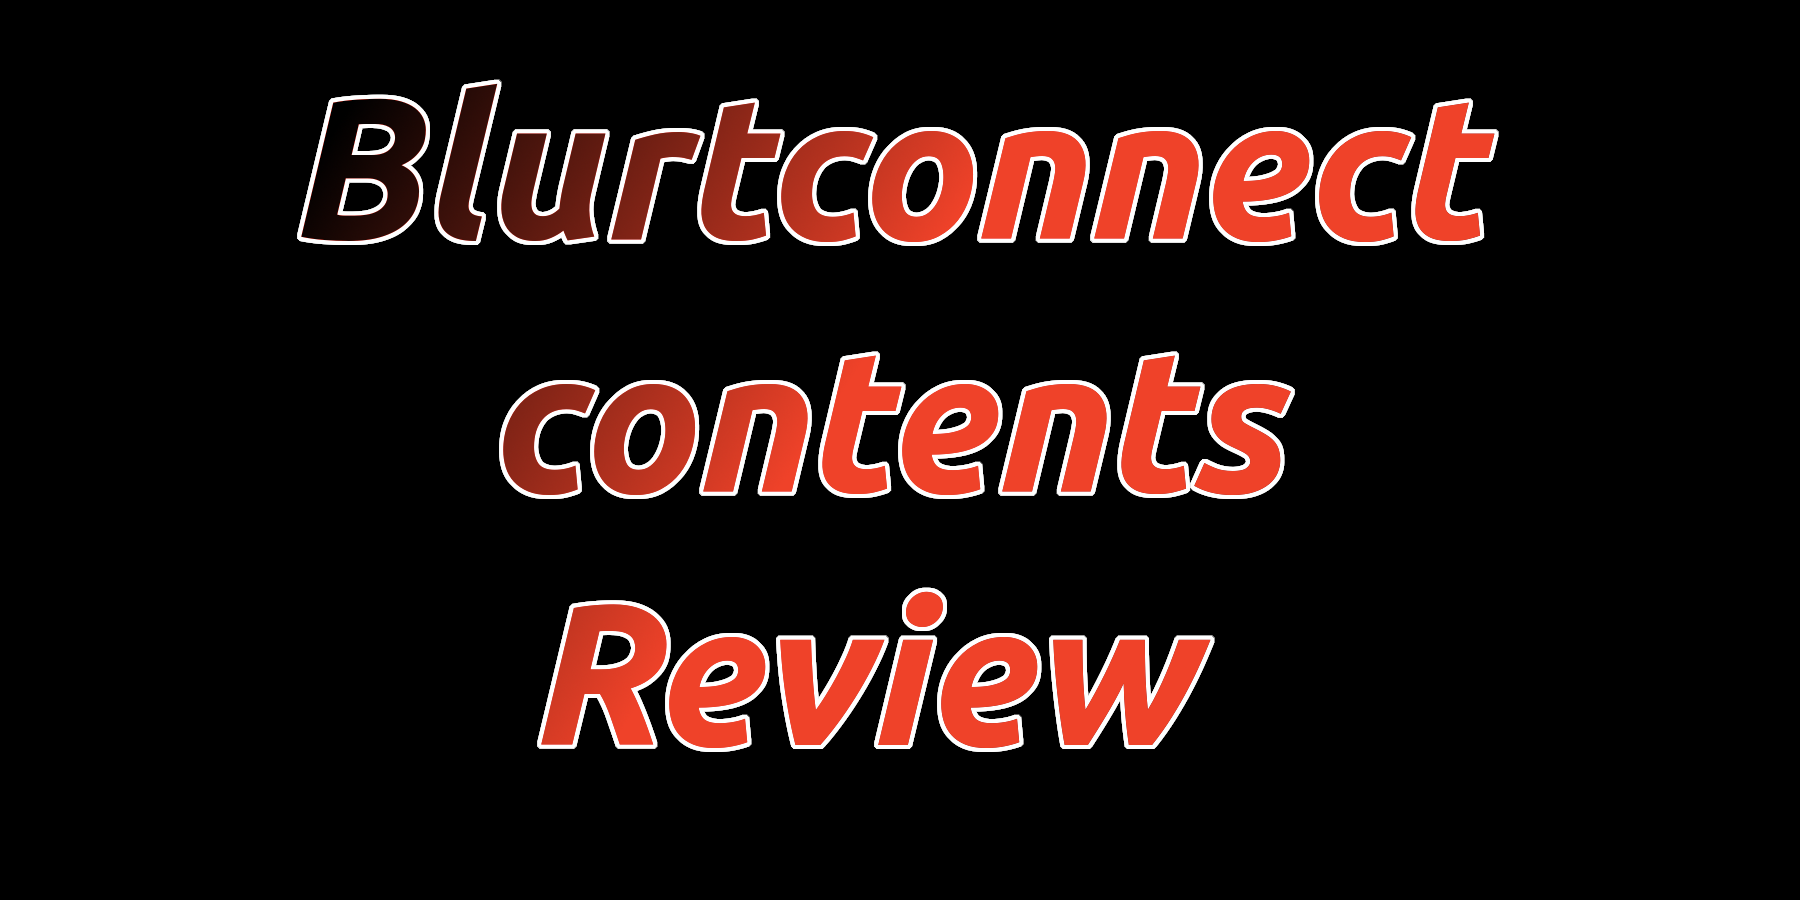 blurtconnect-ng-large-scope-contents-report-1-blurt